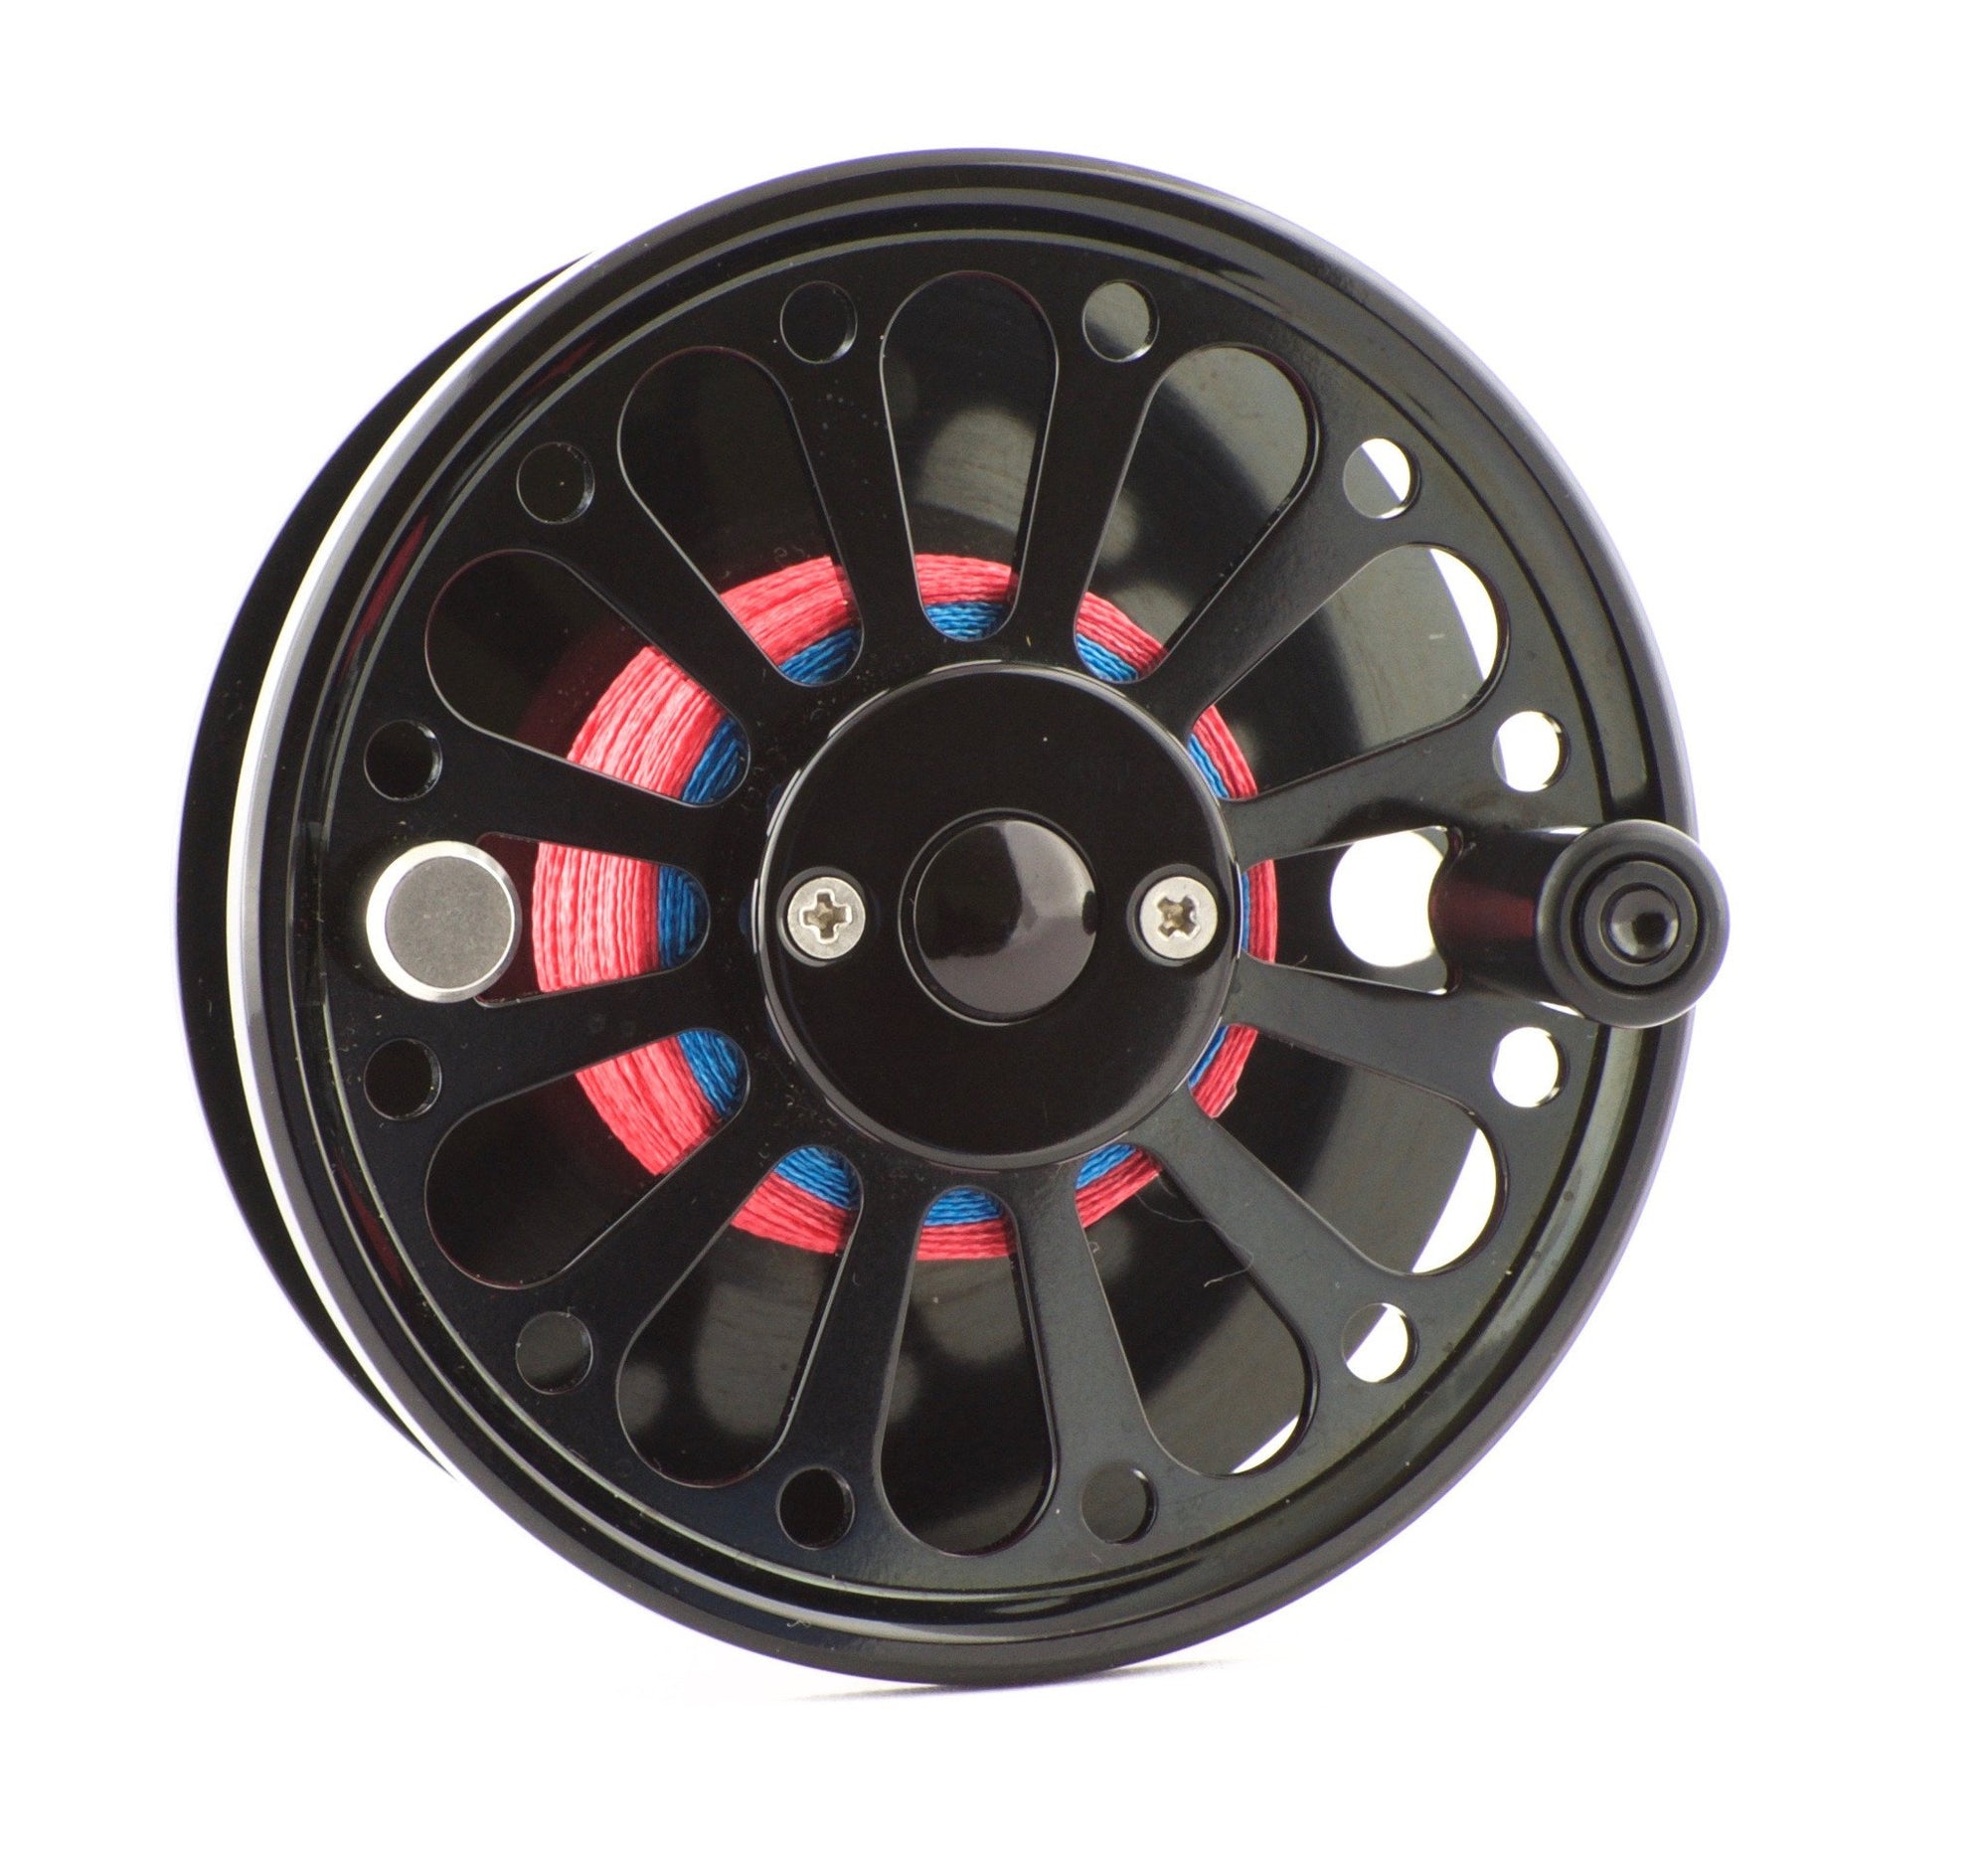 Ross San Miguel 2 - spare spool only